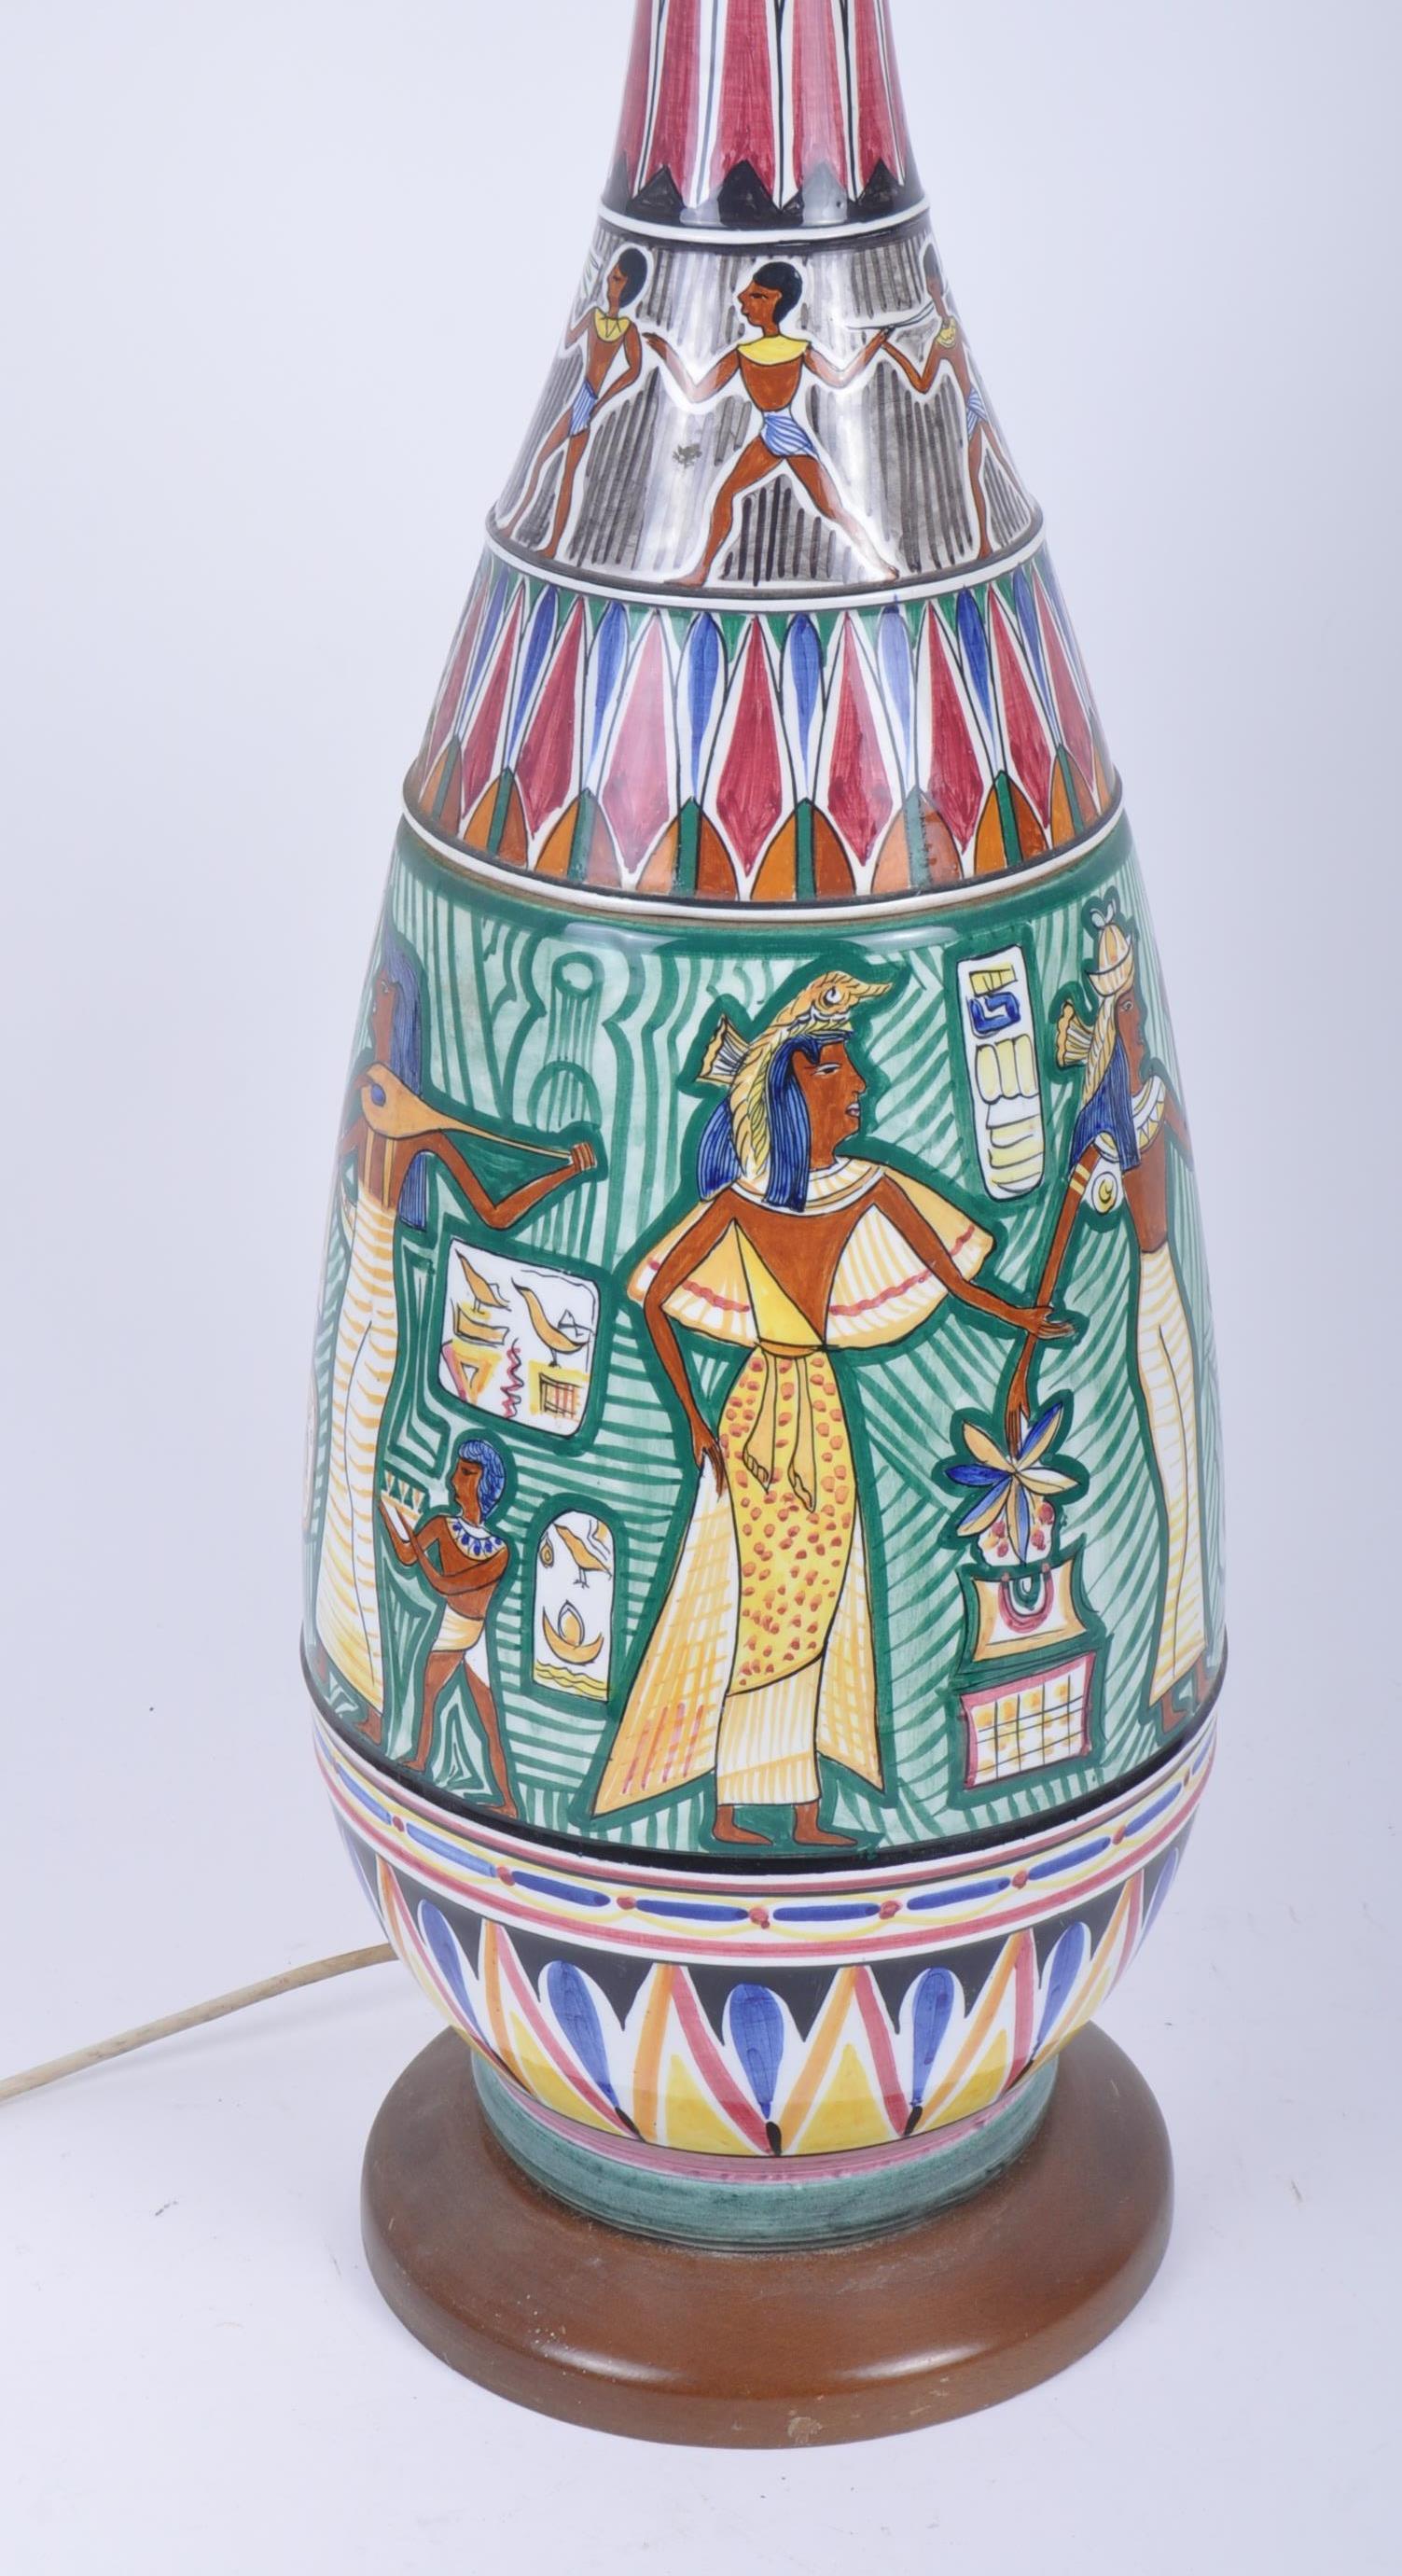 VINTAGE 20TH CENTURY EGYPTIAN INSPIRED TABLE LAMP - Image 2 of 9